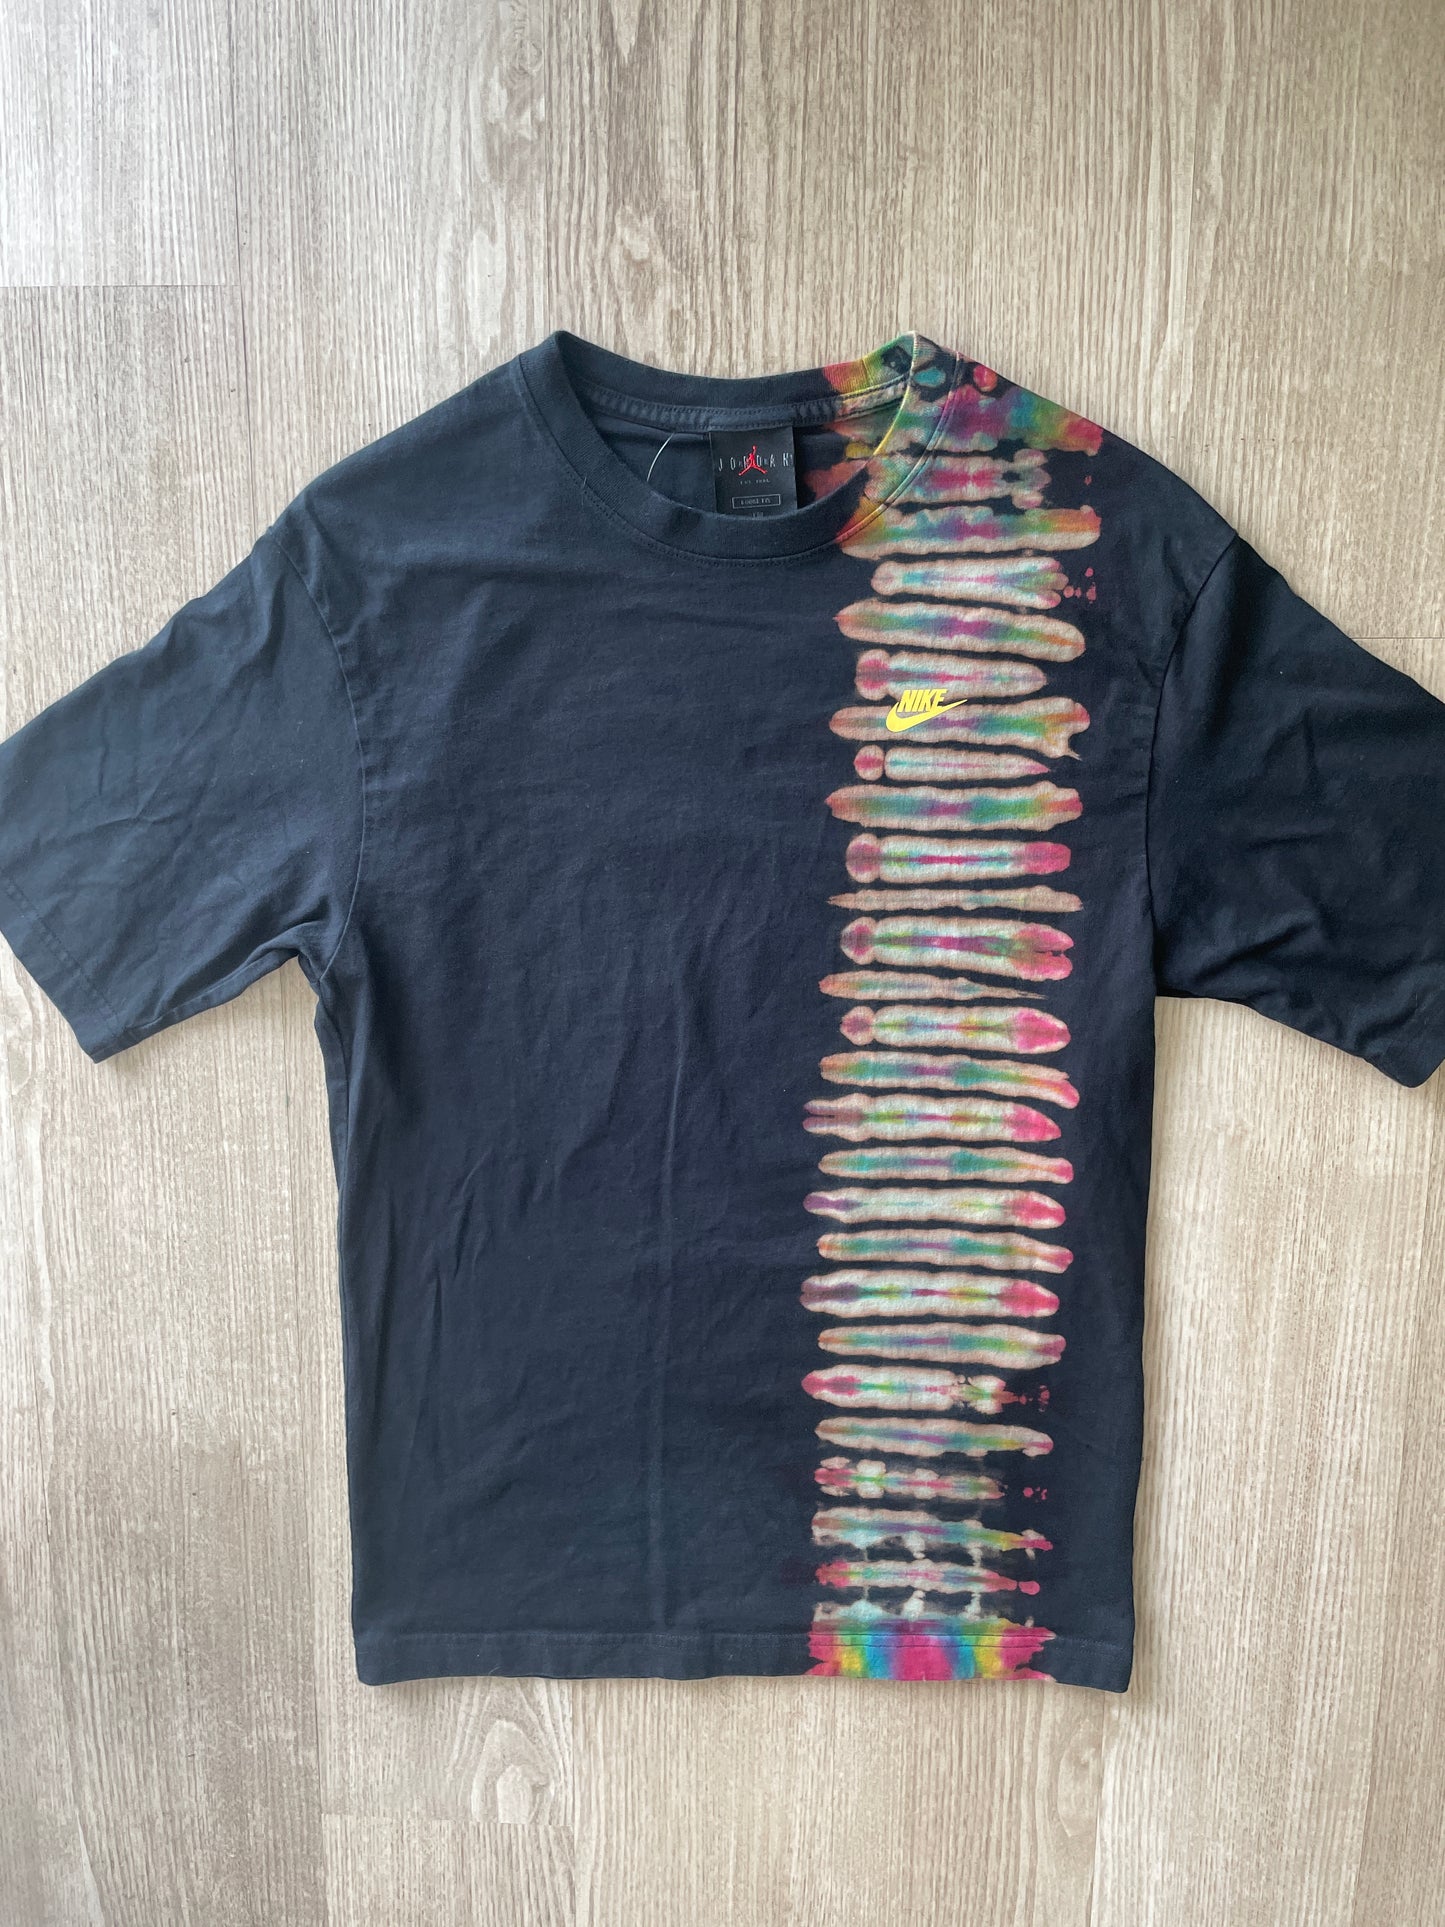 XS/S Men’s Nike Air Jordan Reverse Tie Dye T-Shirt | One-Of-a-Kind Black, Blue, and Red Pleated Short Sleeve